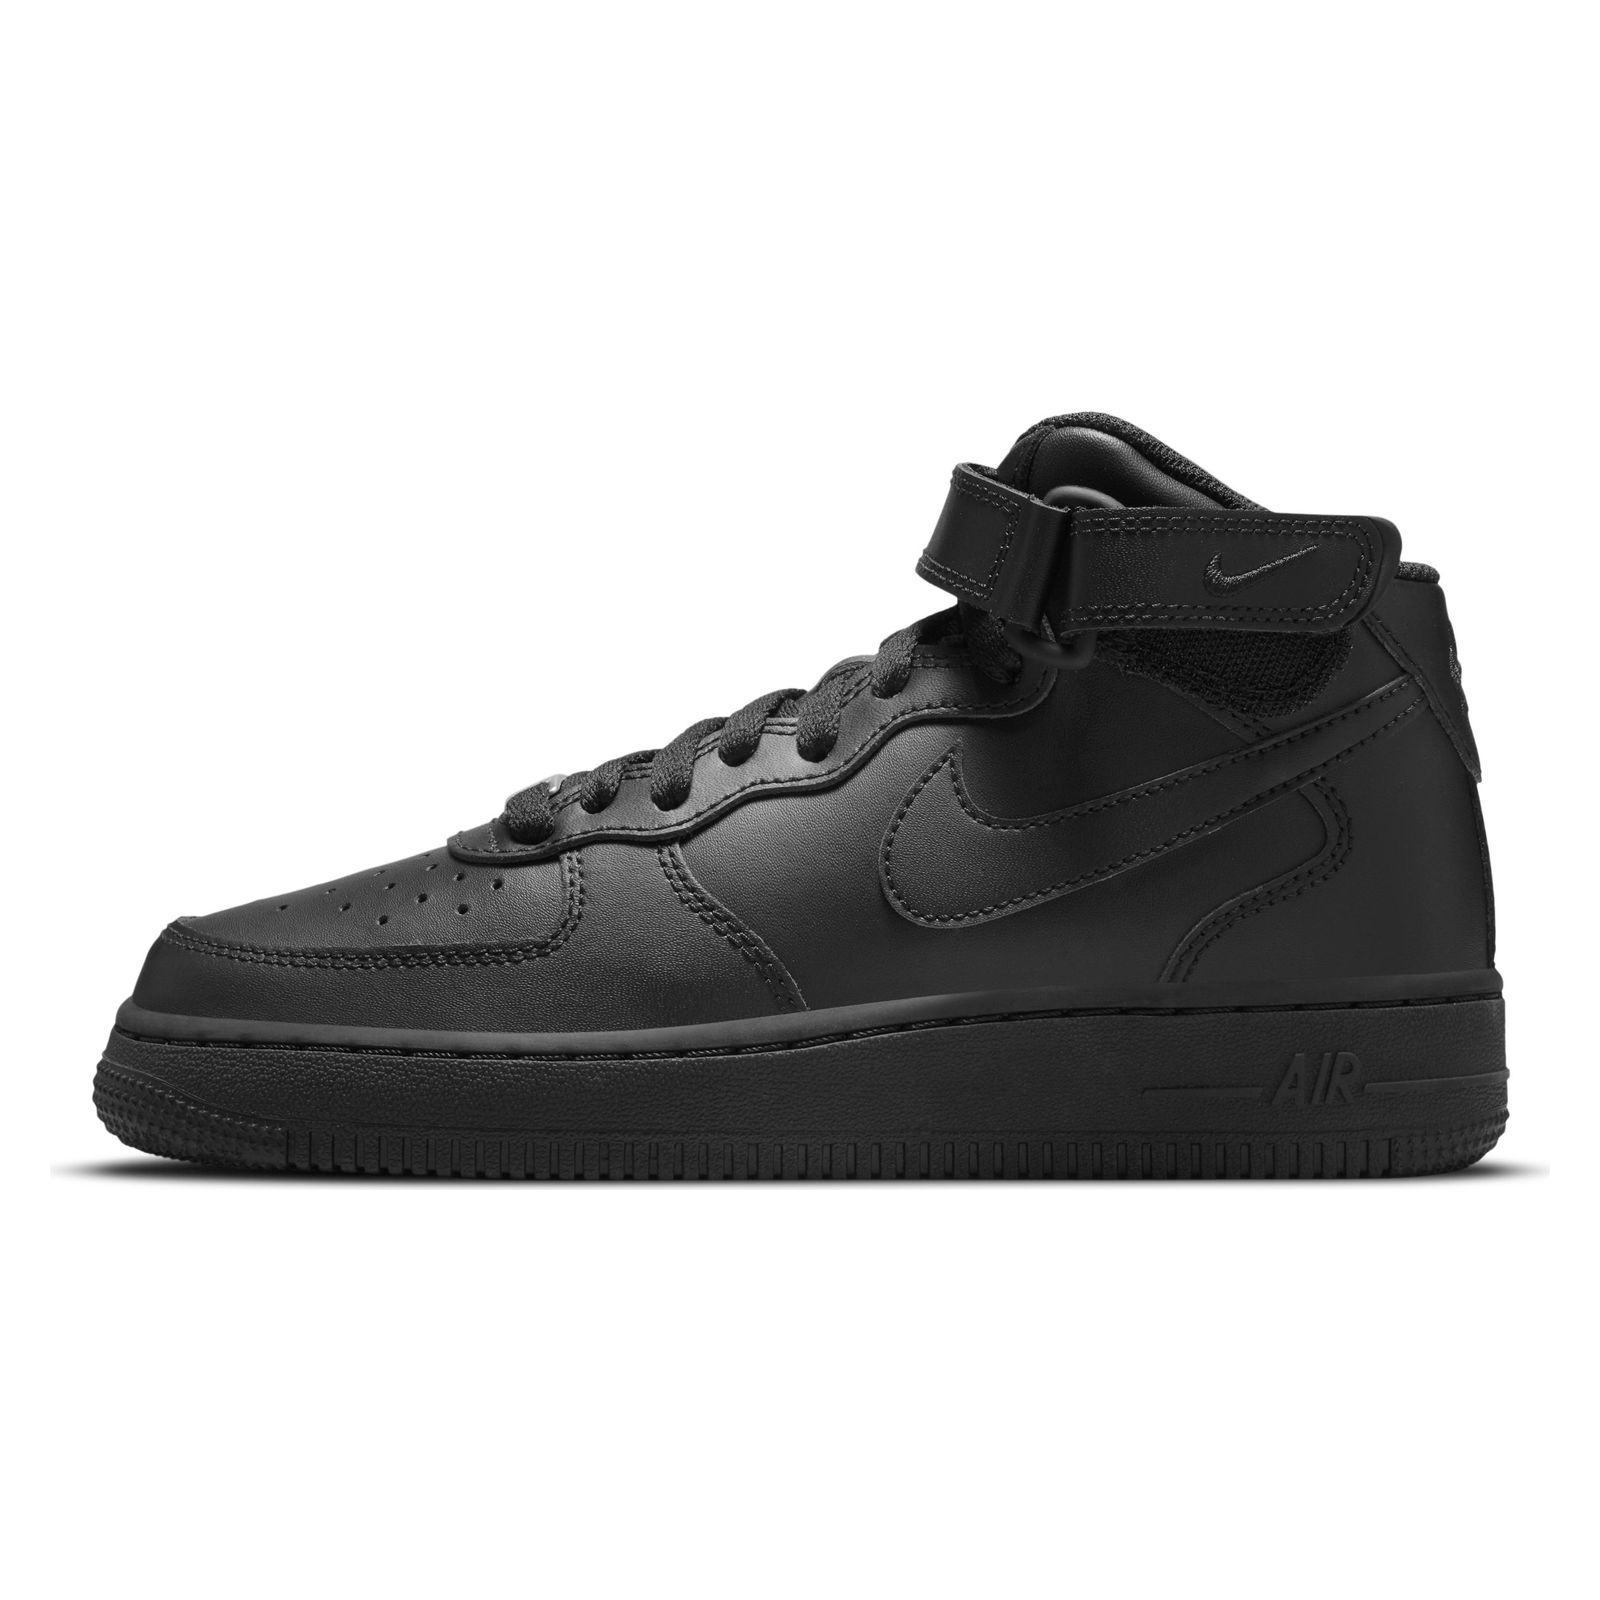 Inform isolation shuffle Ghete NIKE copii AIR FORCE 1 MID LE - DH2933001 - TopSport.ro